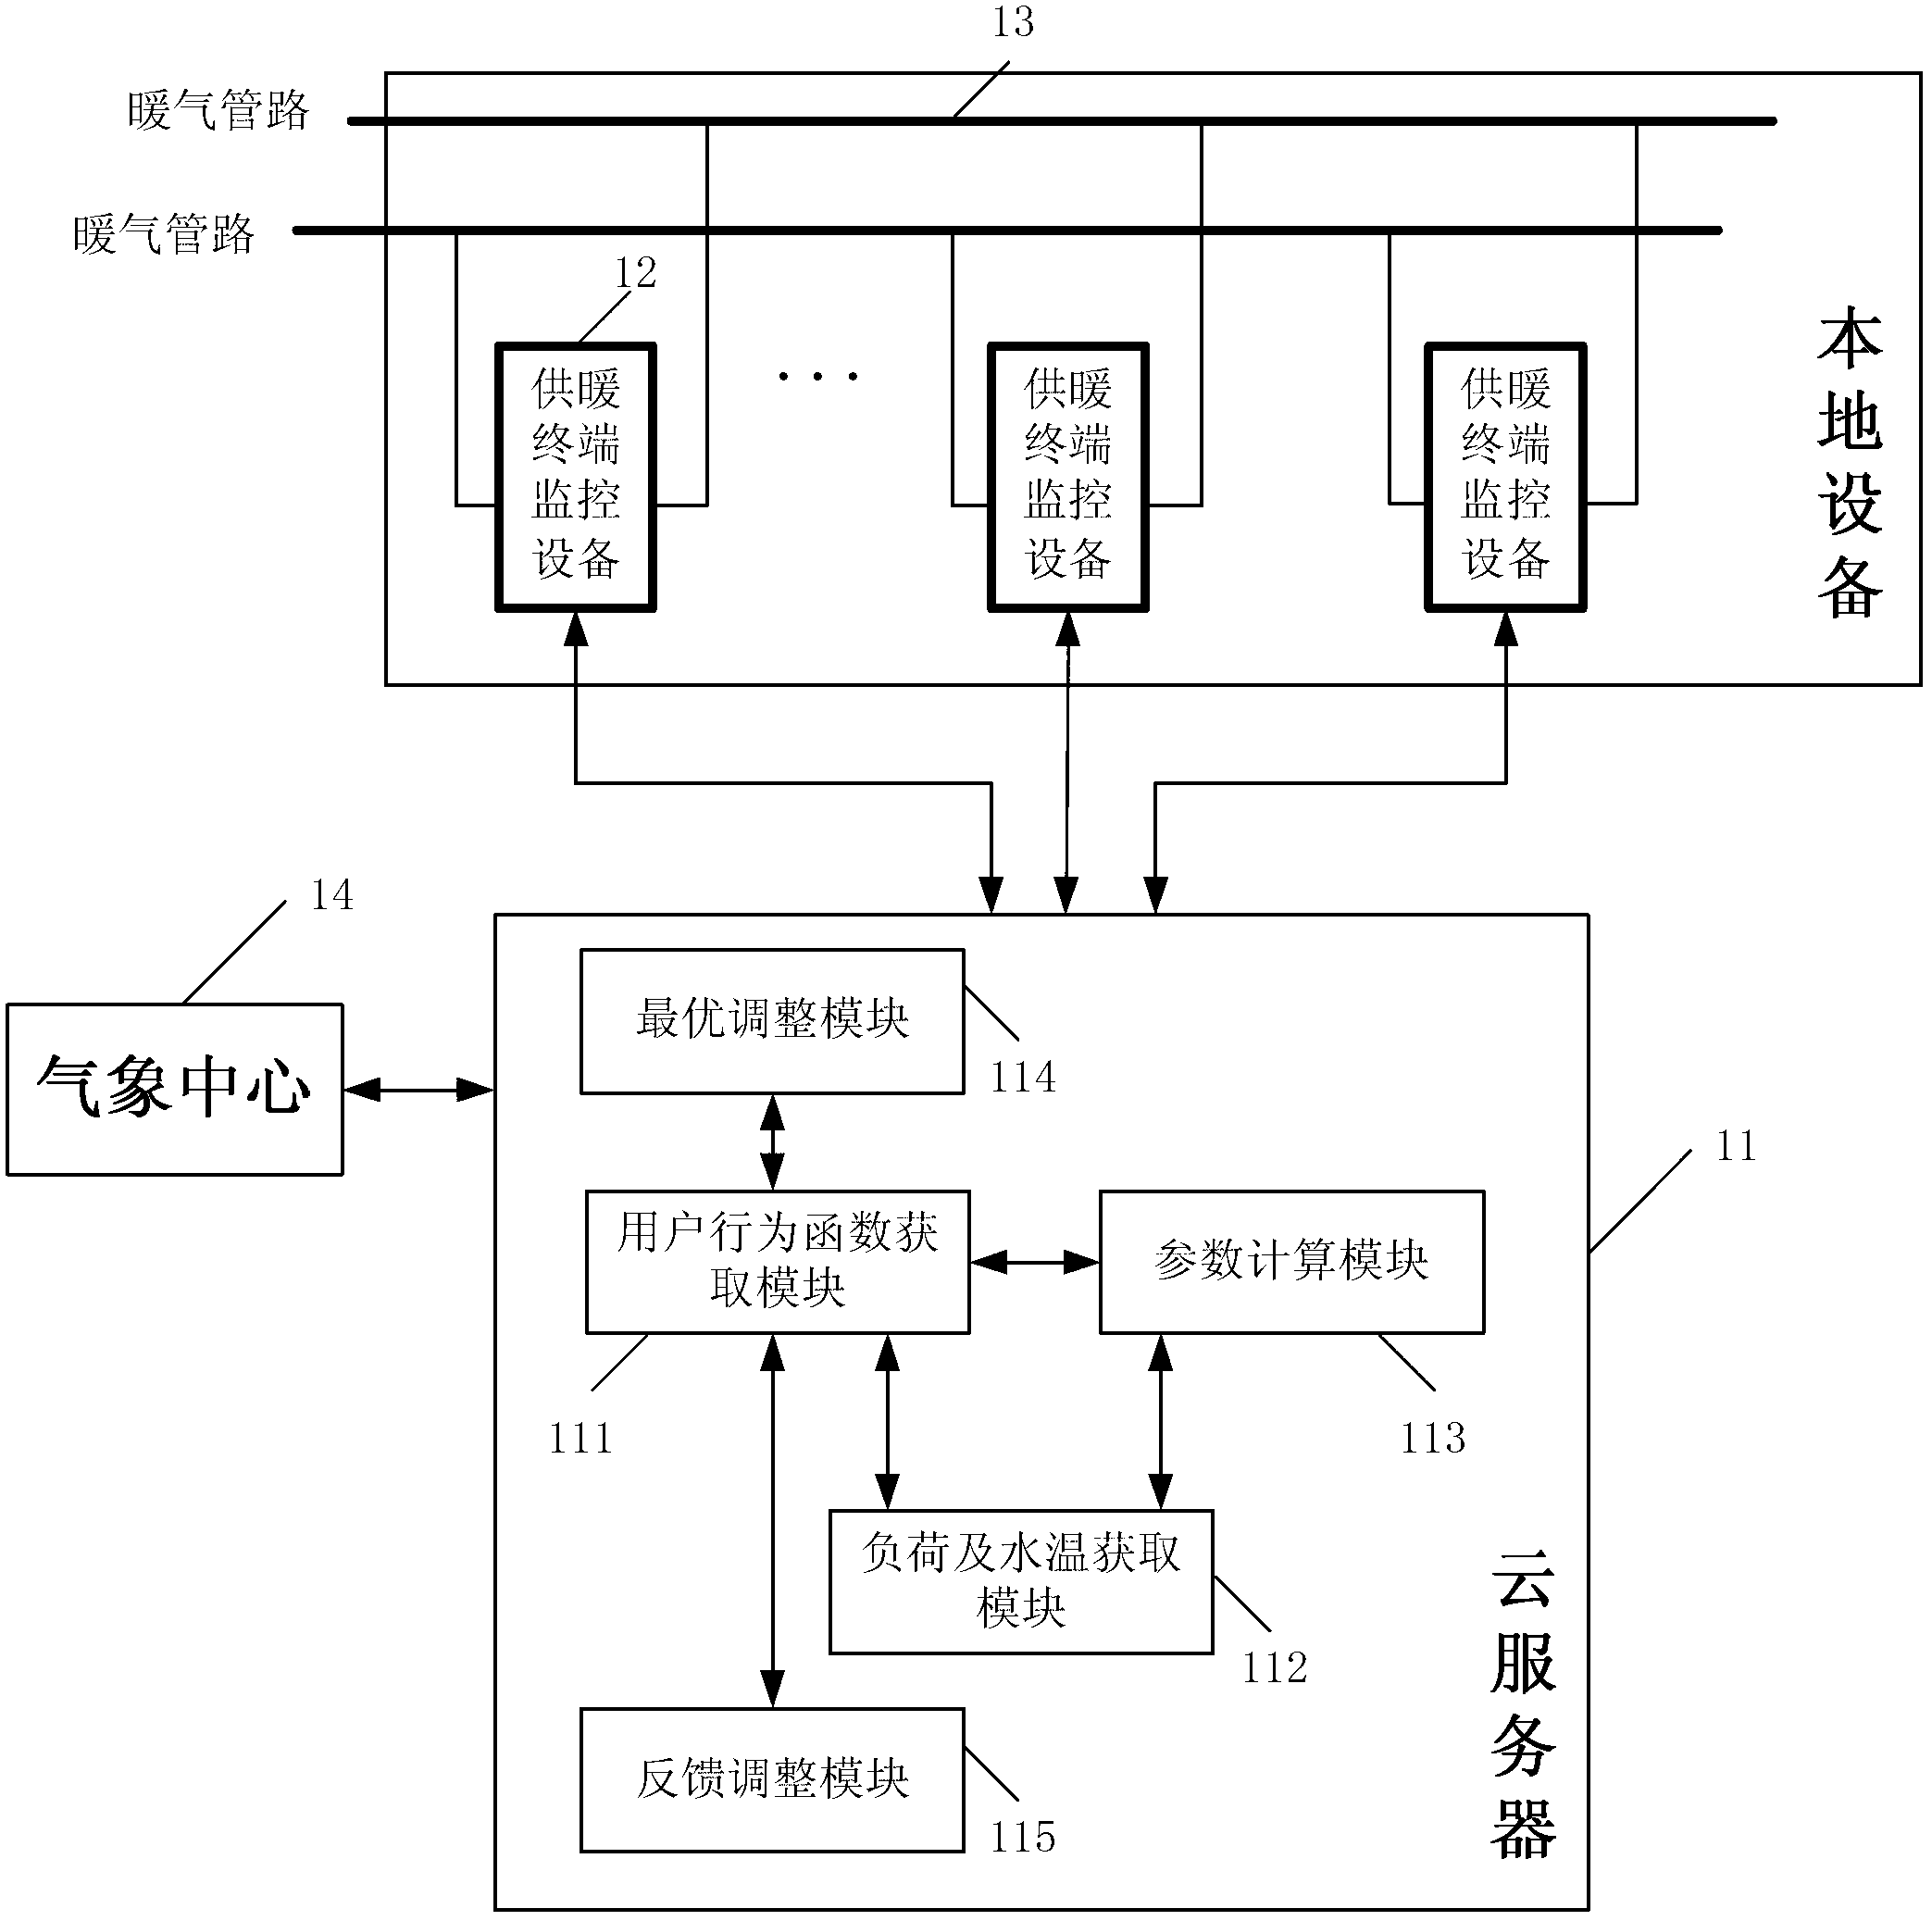 Central heating monitoring system based on cloud service and adjustment method thereof